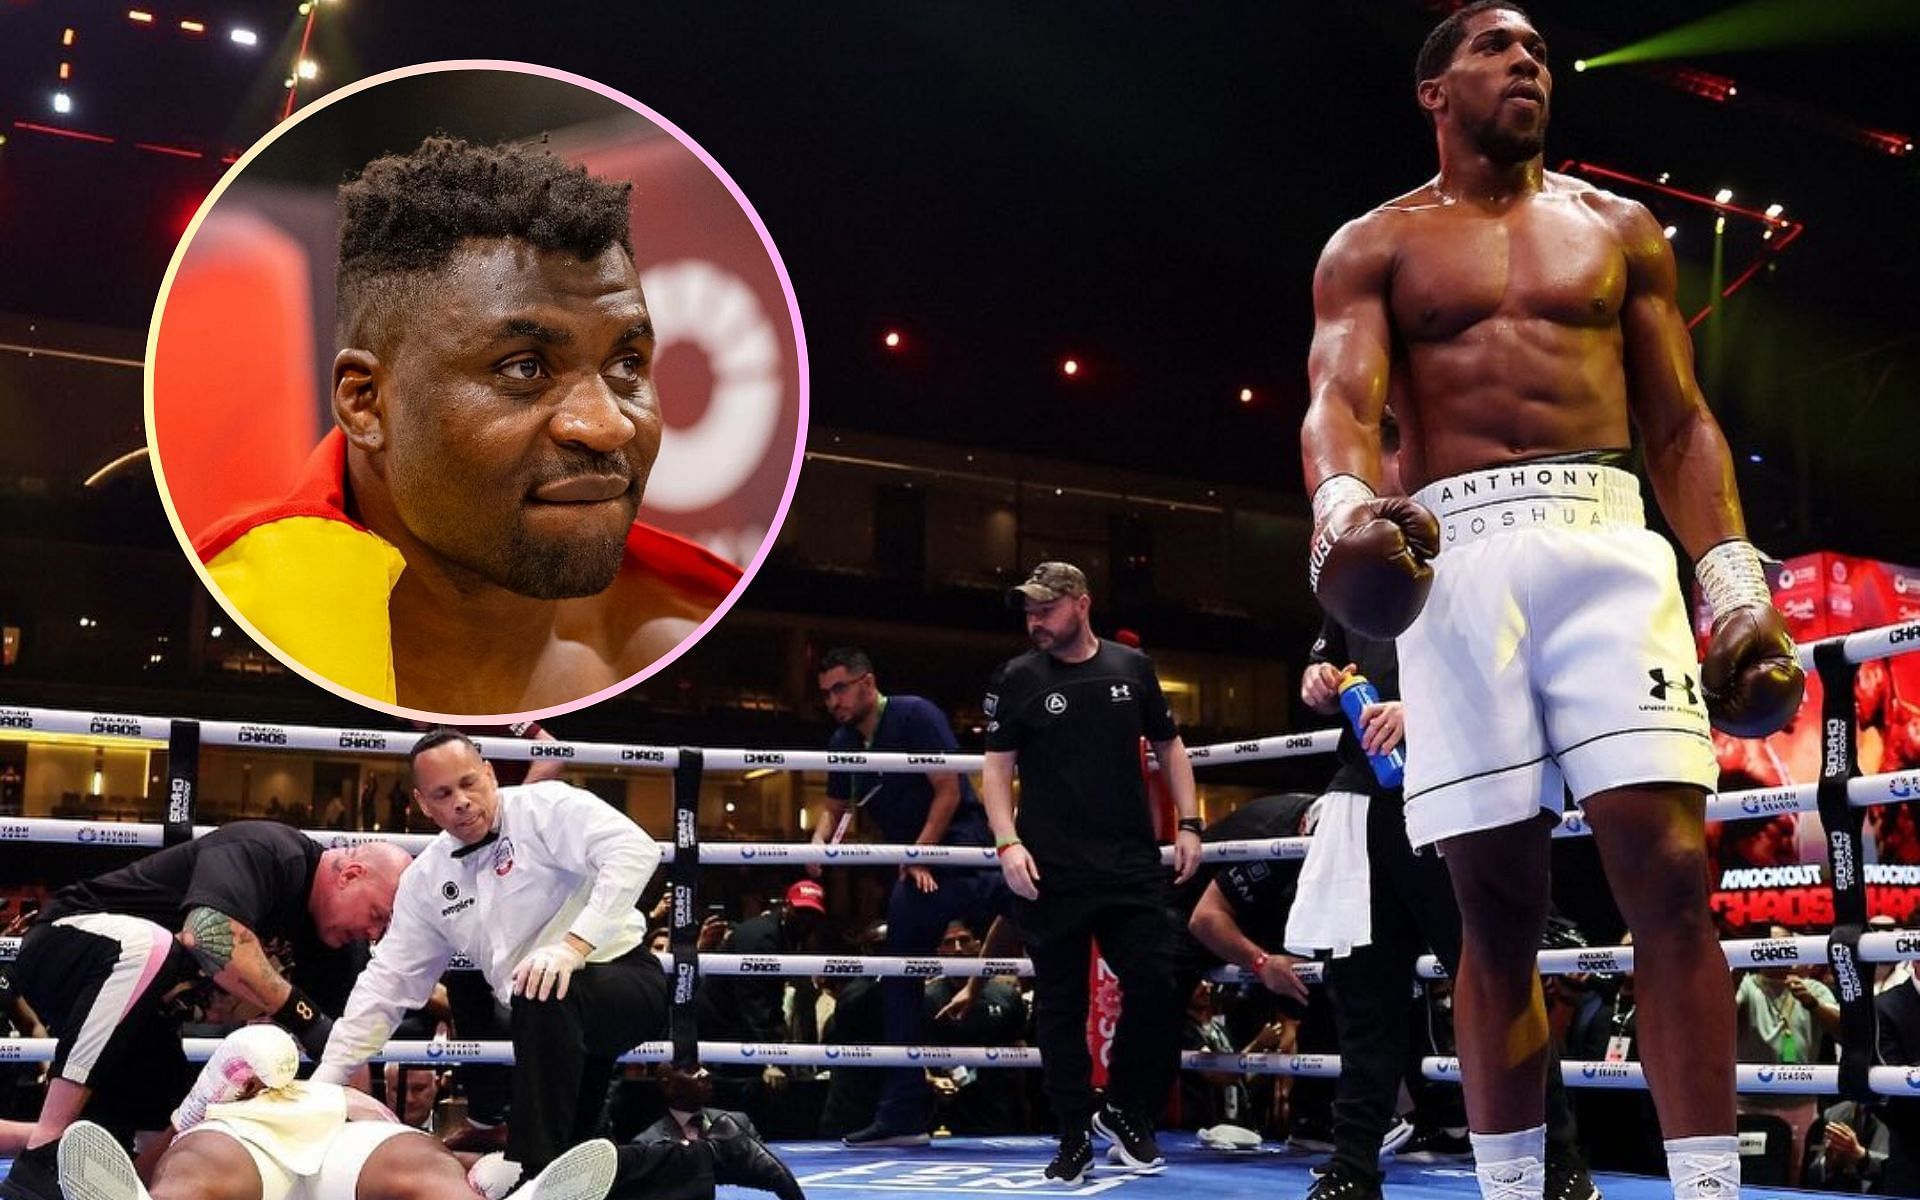 Francis Ngannou opens up about concerns following brutal blow from Anthony Joshua